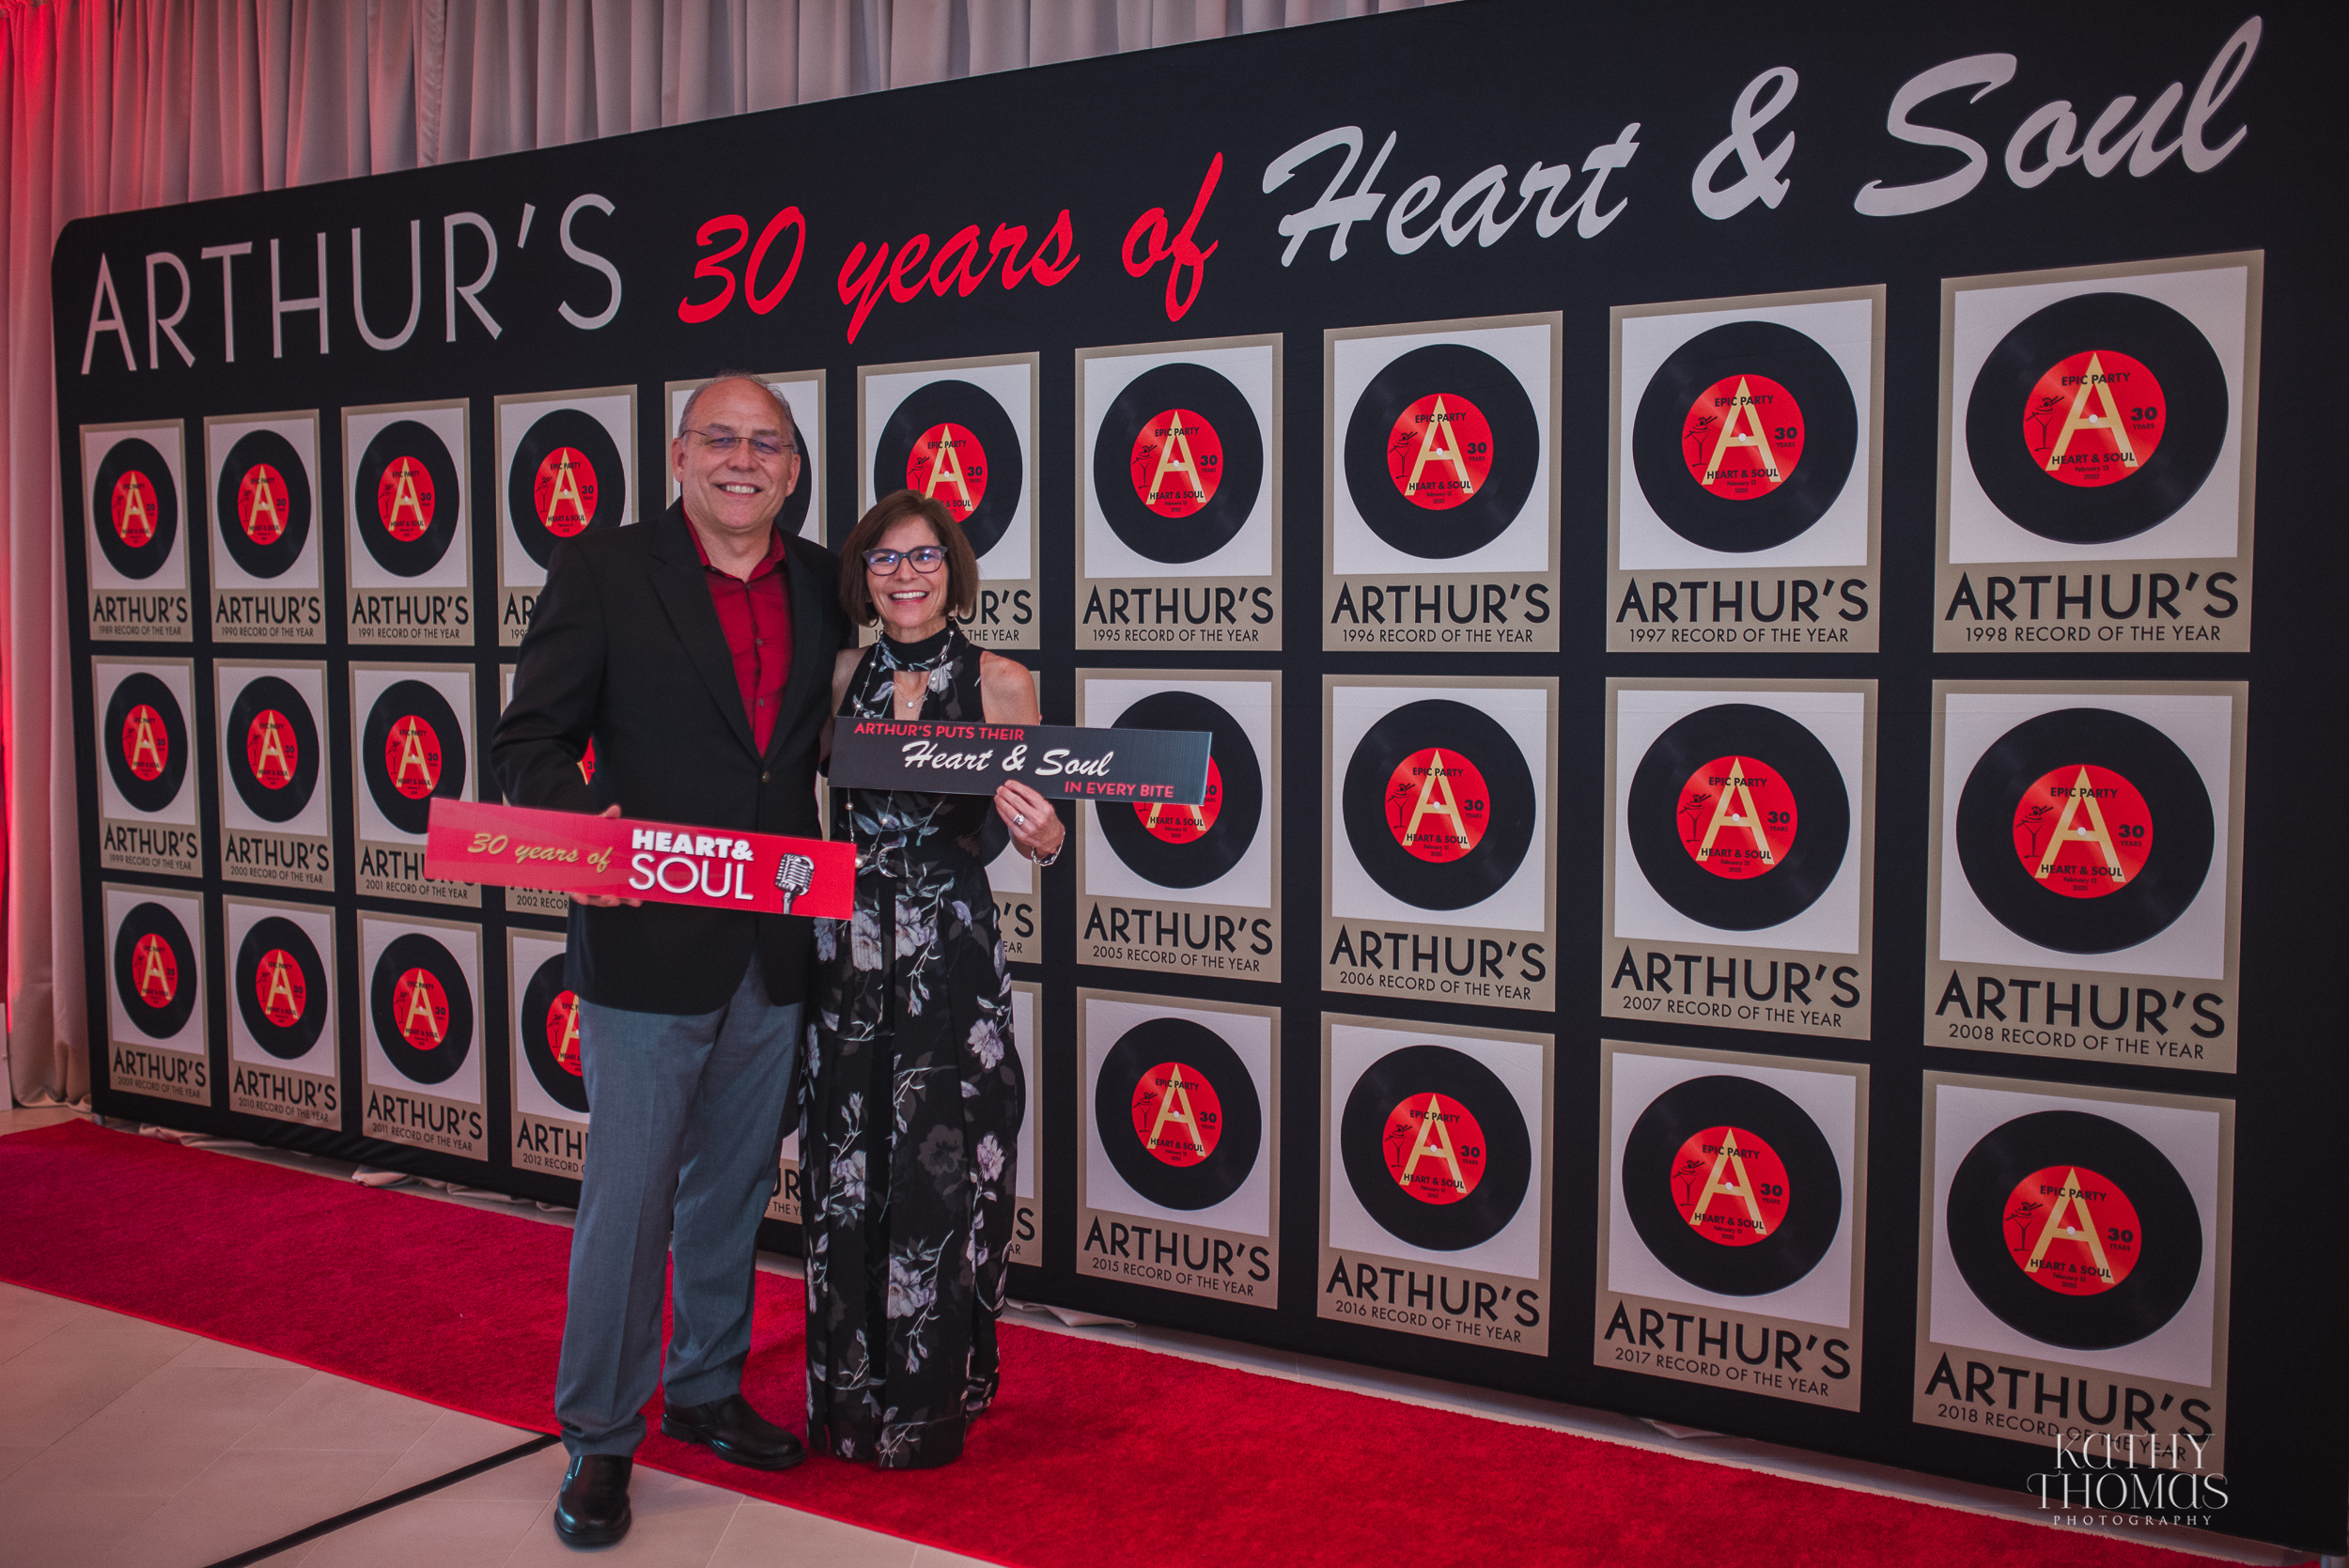 Arthur's Catering | Heart & Soul | Custom Step & Repeat | Motown Party | Orlando Event Planner